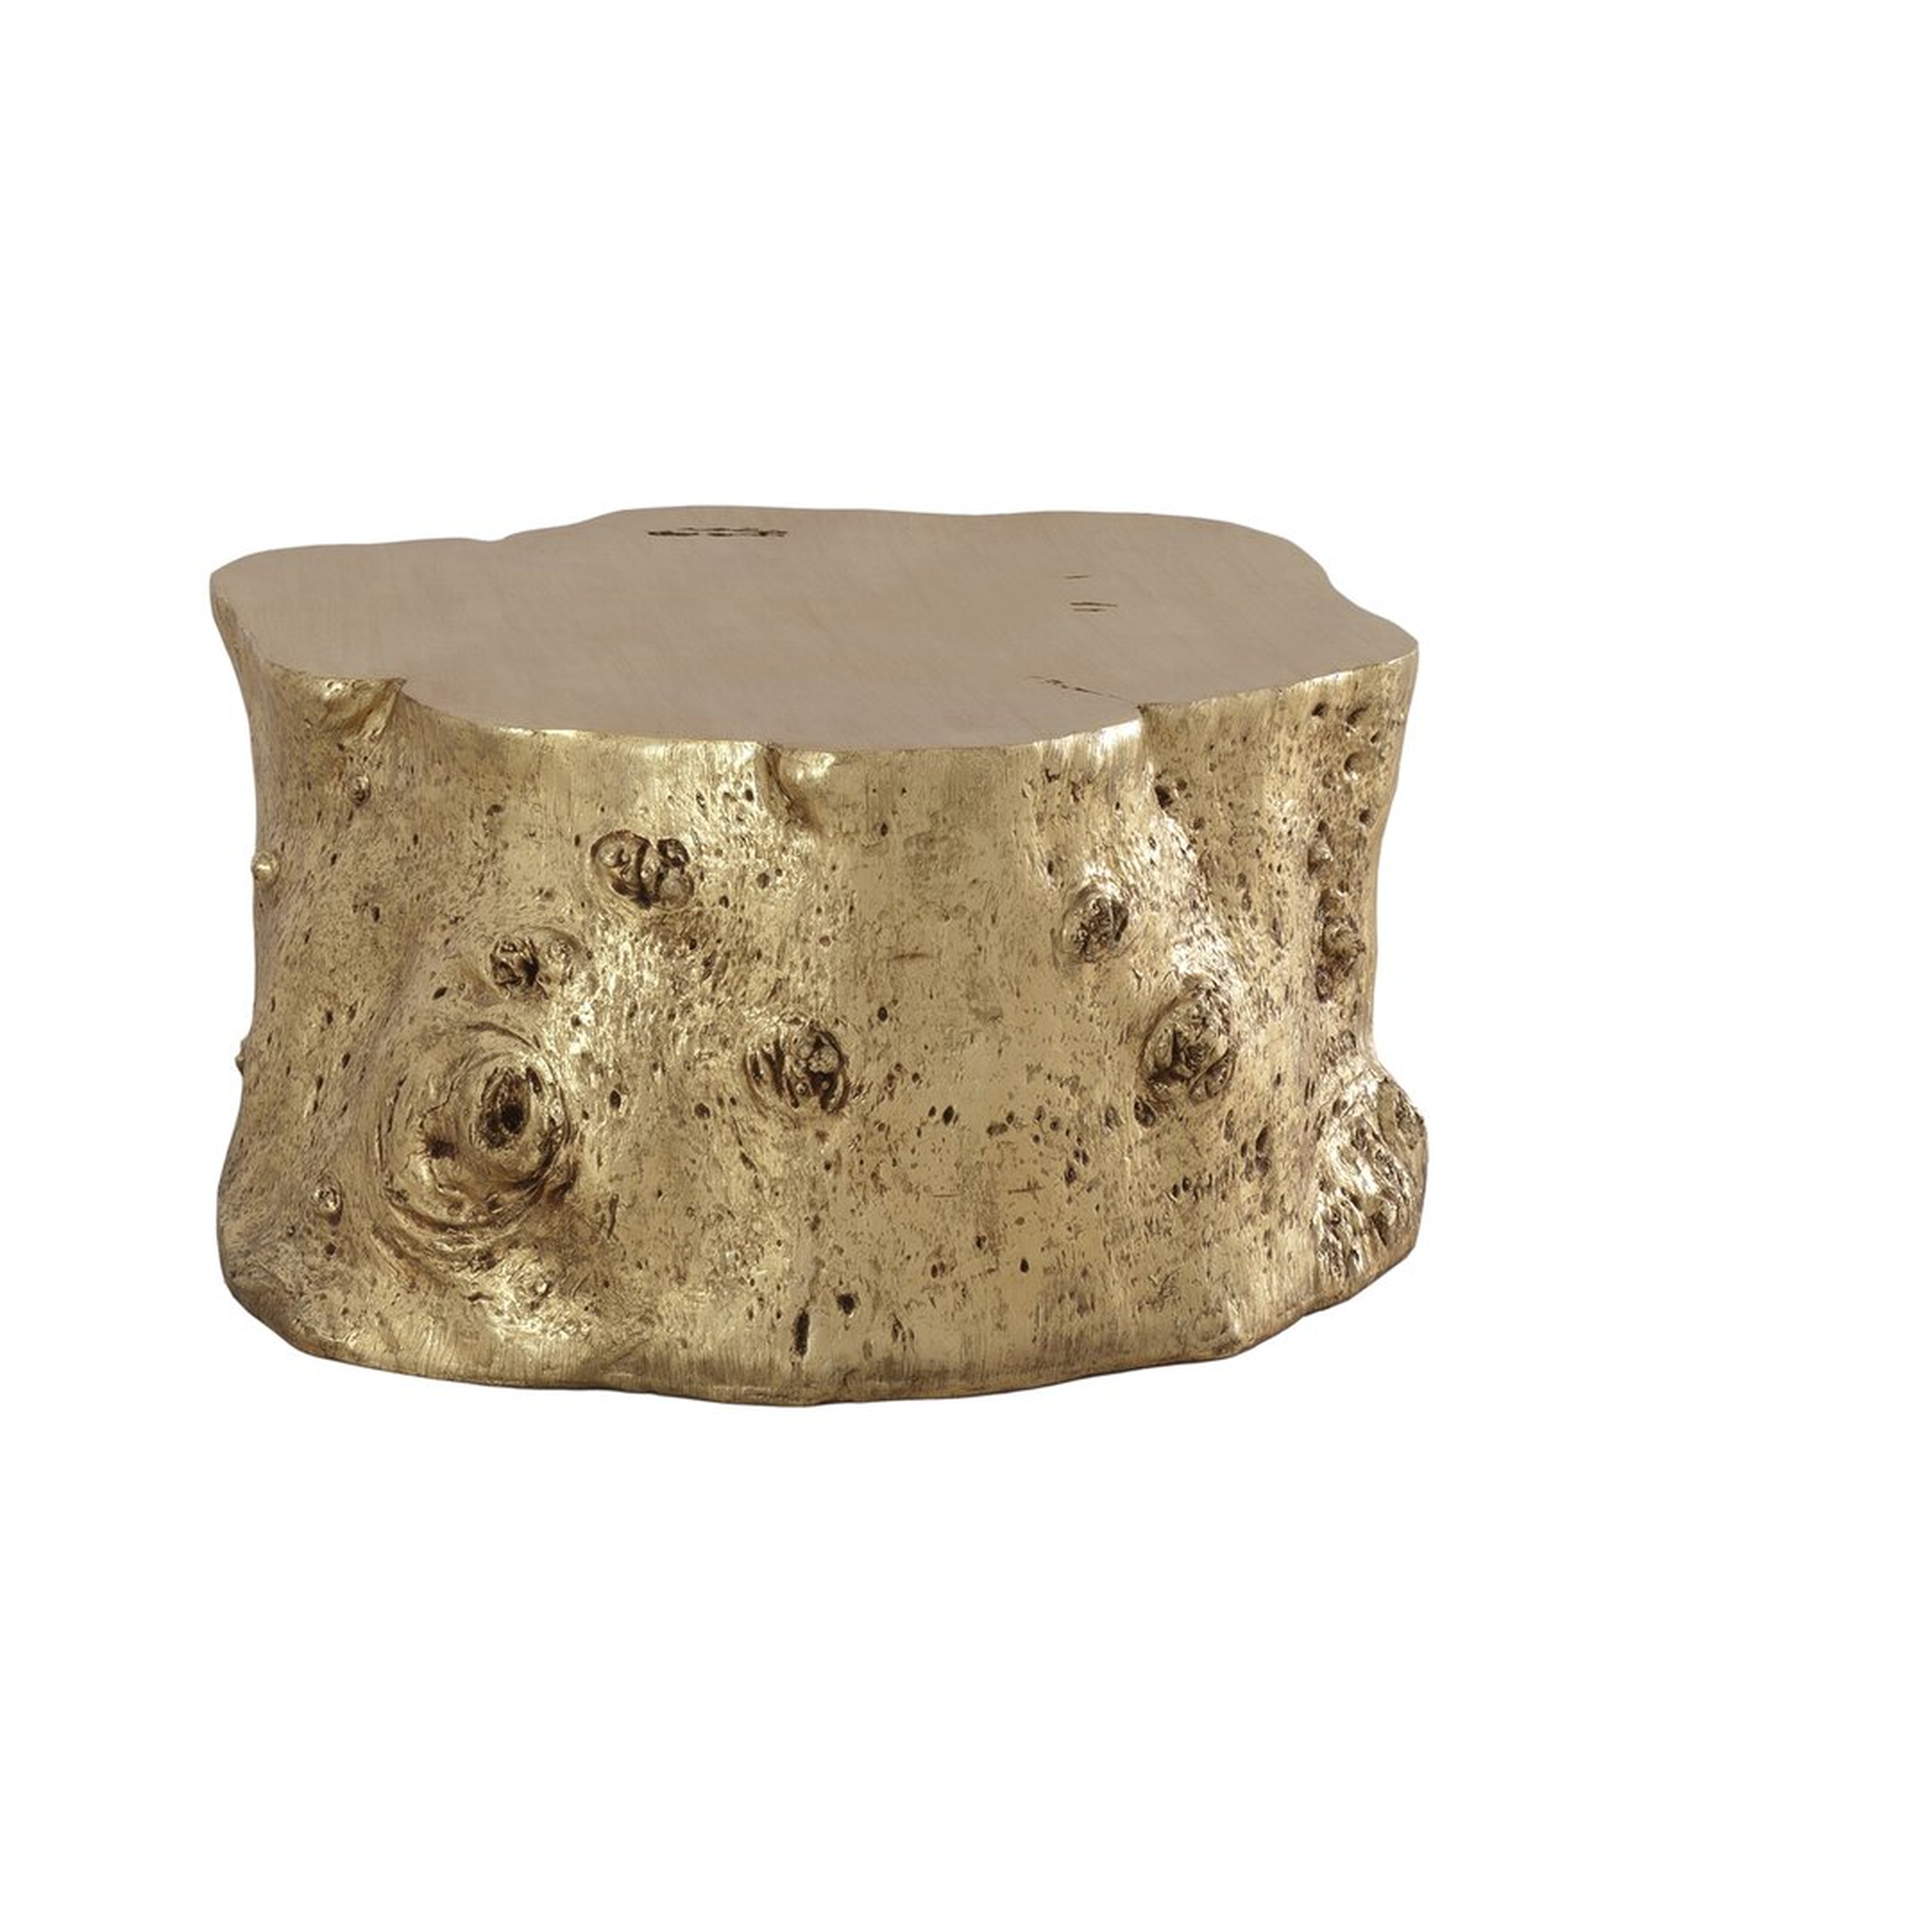 "Phillips Collection Log Coffee Table, Gold Leaf" - Perigold